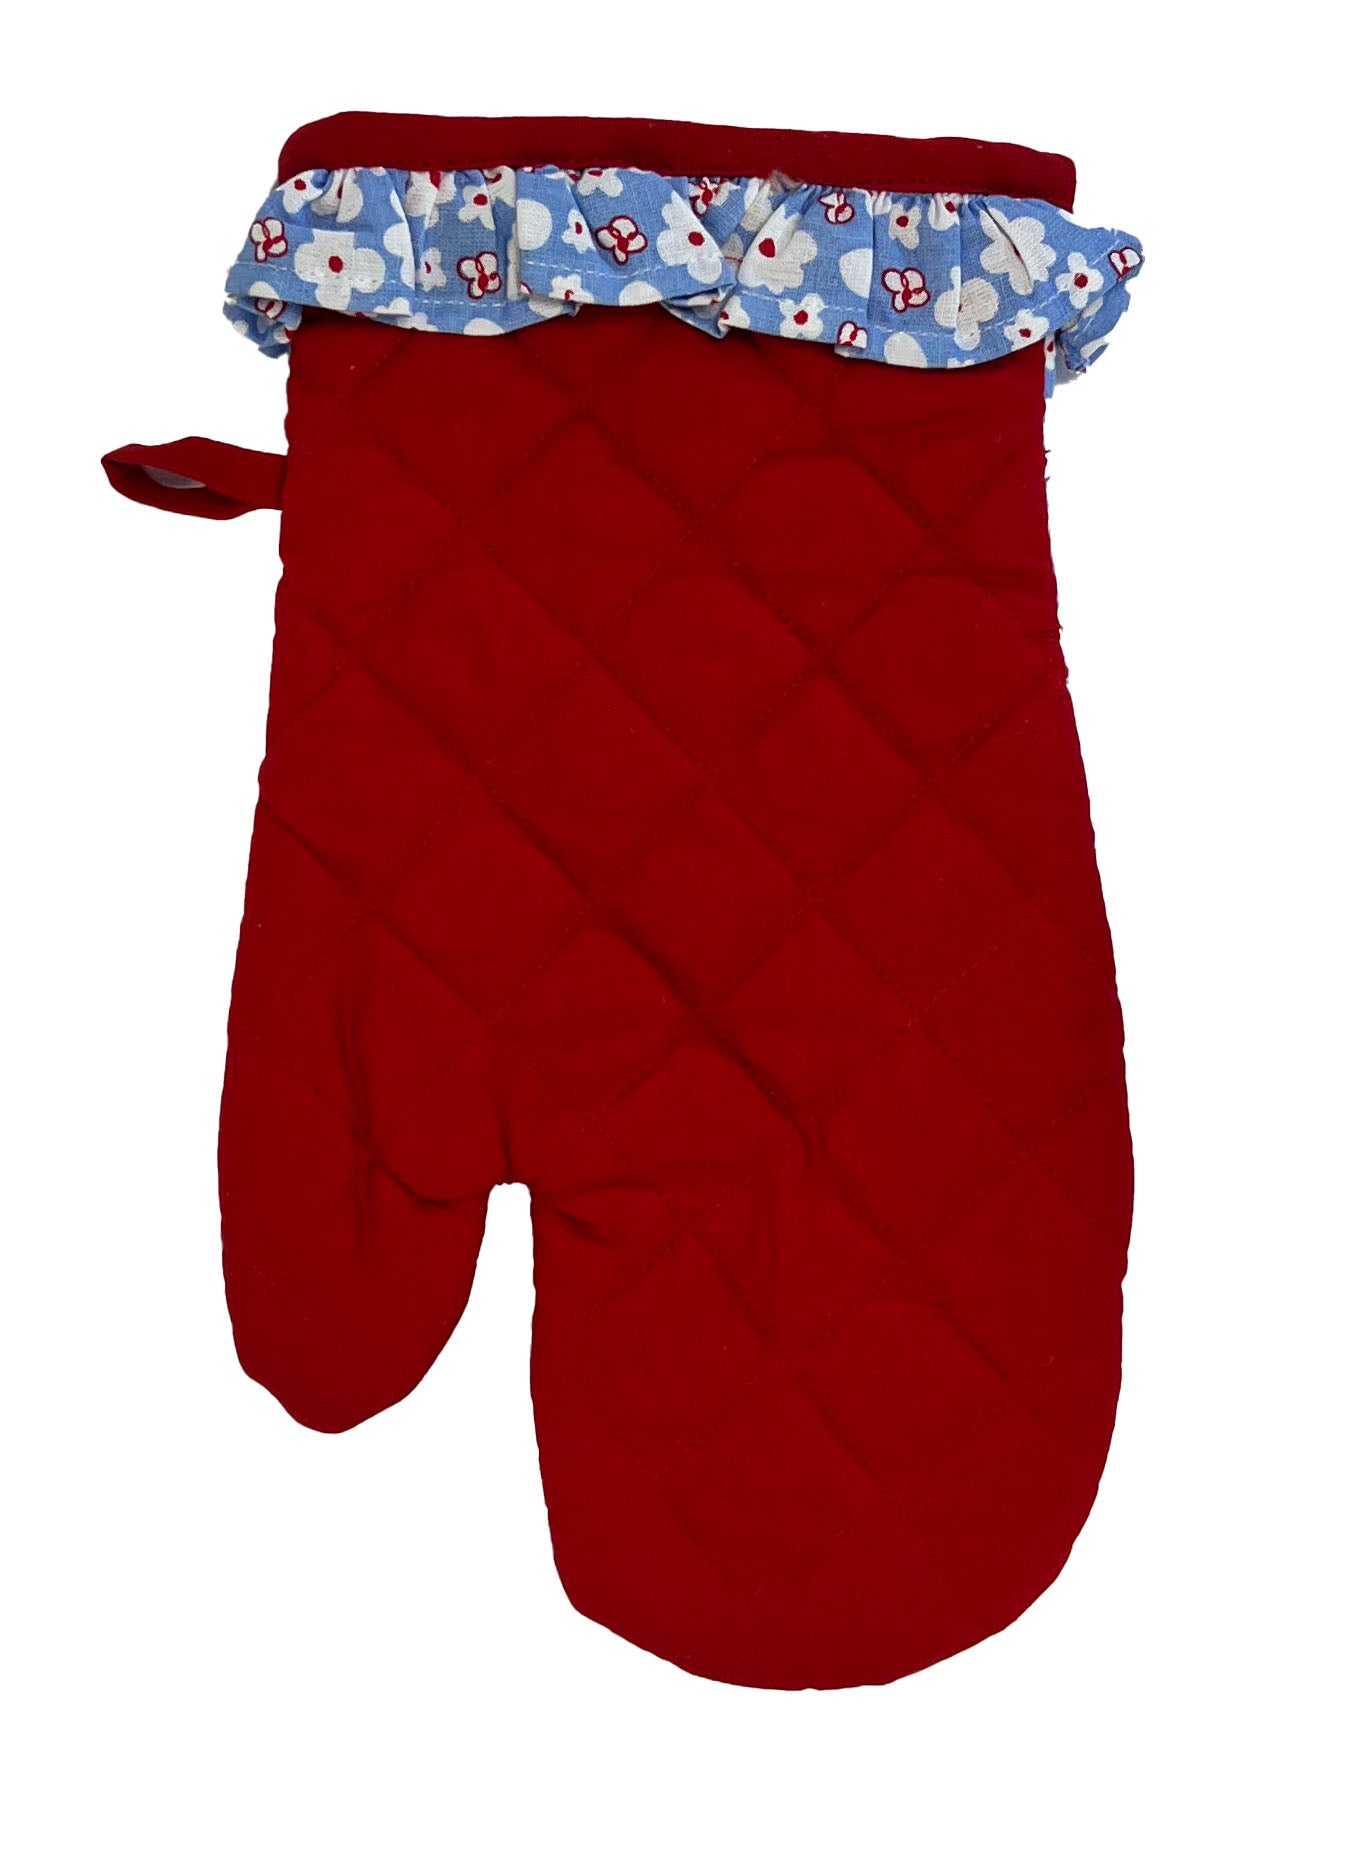 50's inspired oven mitt from Sterck & Co. Red side.